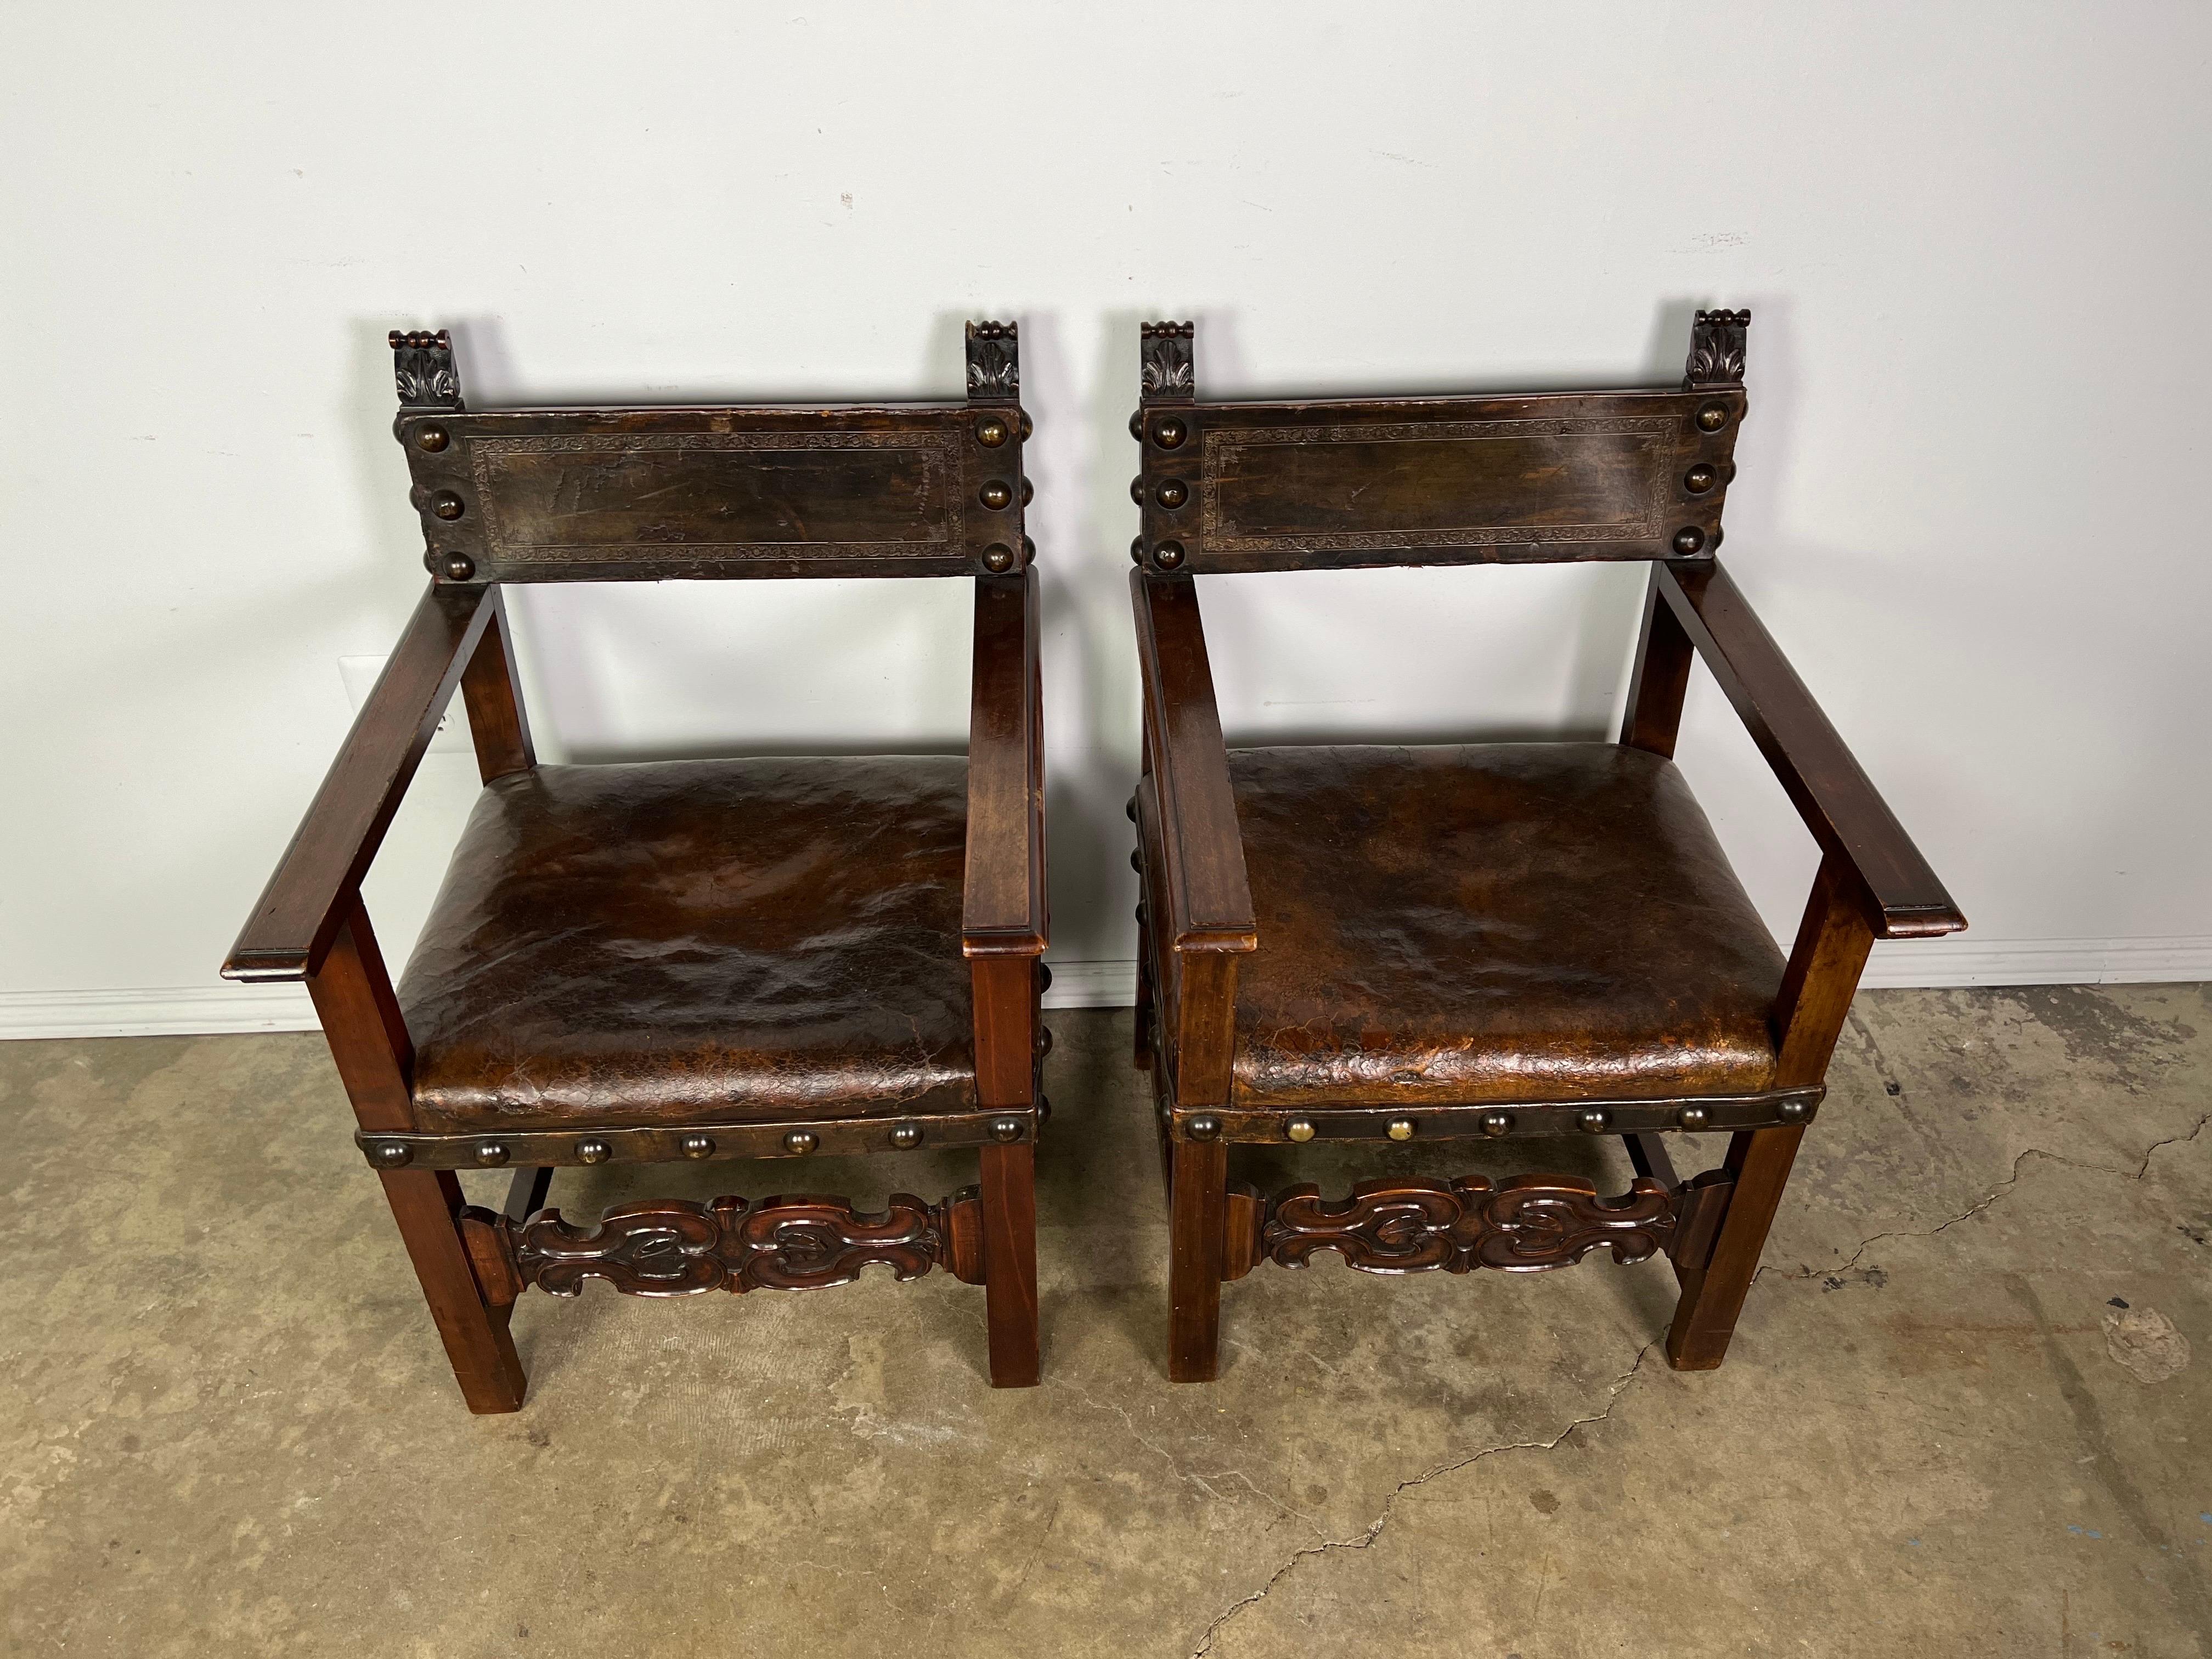 Pair of 19th C. Spanish Baroque style leather upholstered walnut armchairs. Original brass nailhead trim detail.